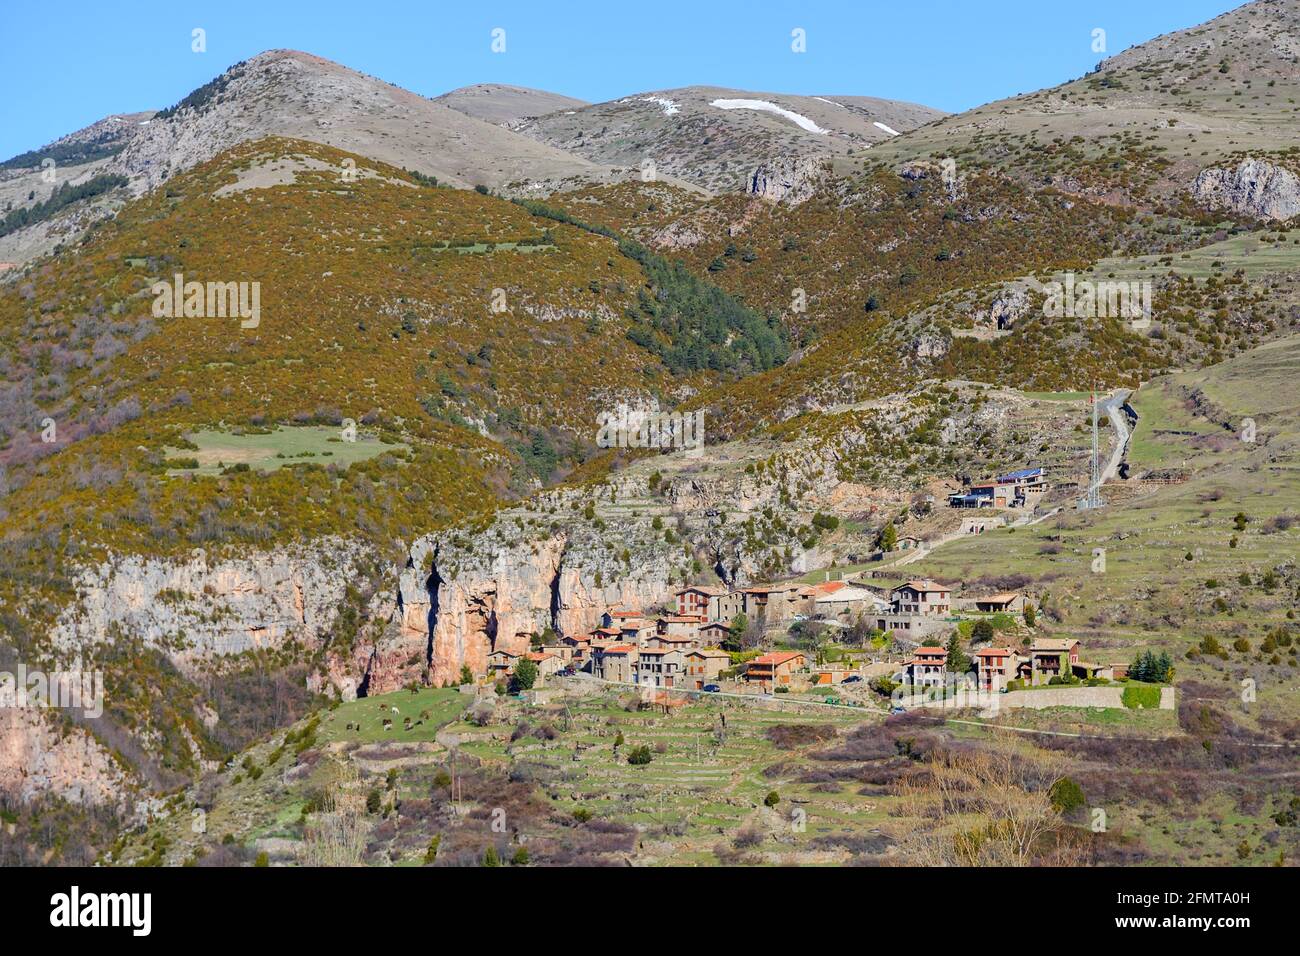 Castellar de Nuch, catalan village in the Pyrenees mountains, belonging to the province of Barcelona. Stock Photo